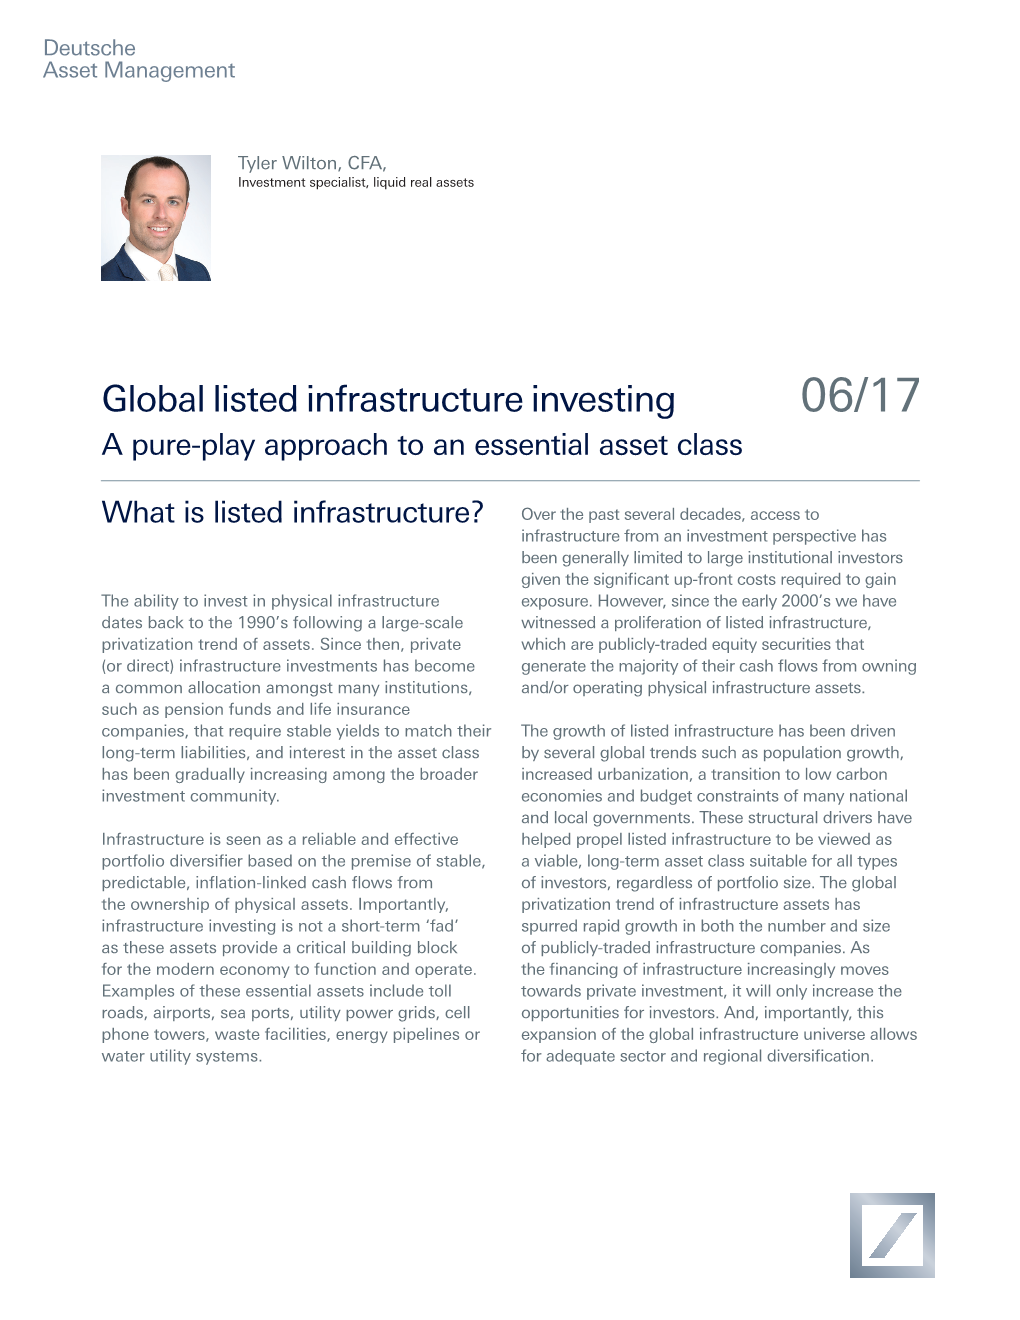 Global Listed Infrastructure Investing 06/17 a Pure-Play Approach to an Essential Asset Class